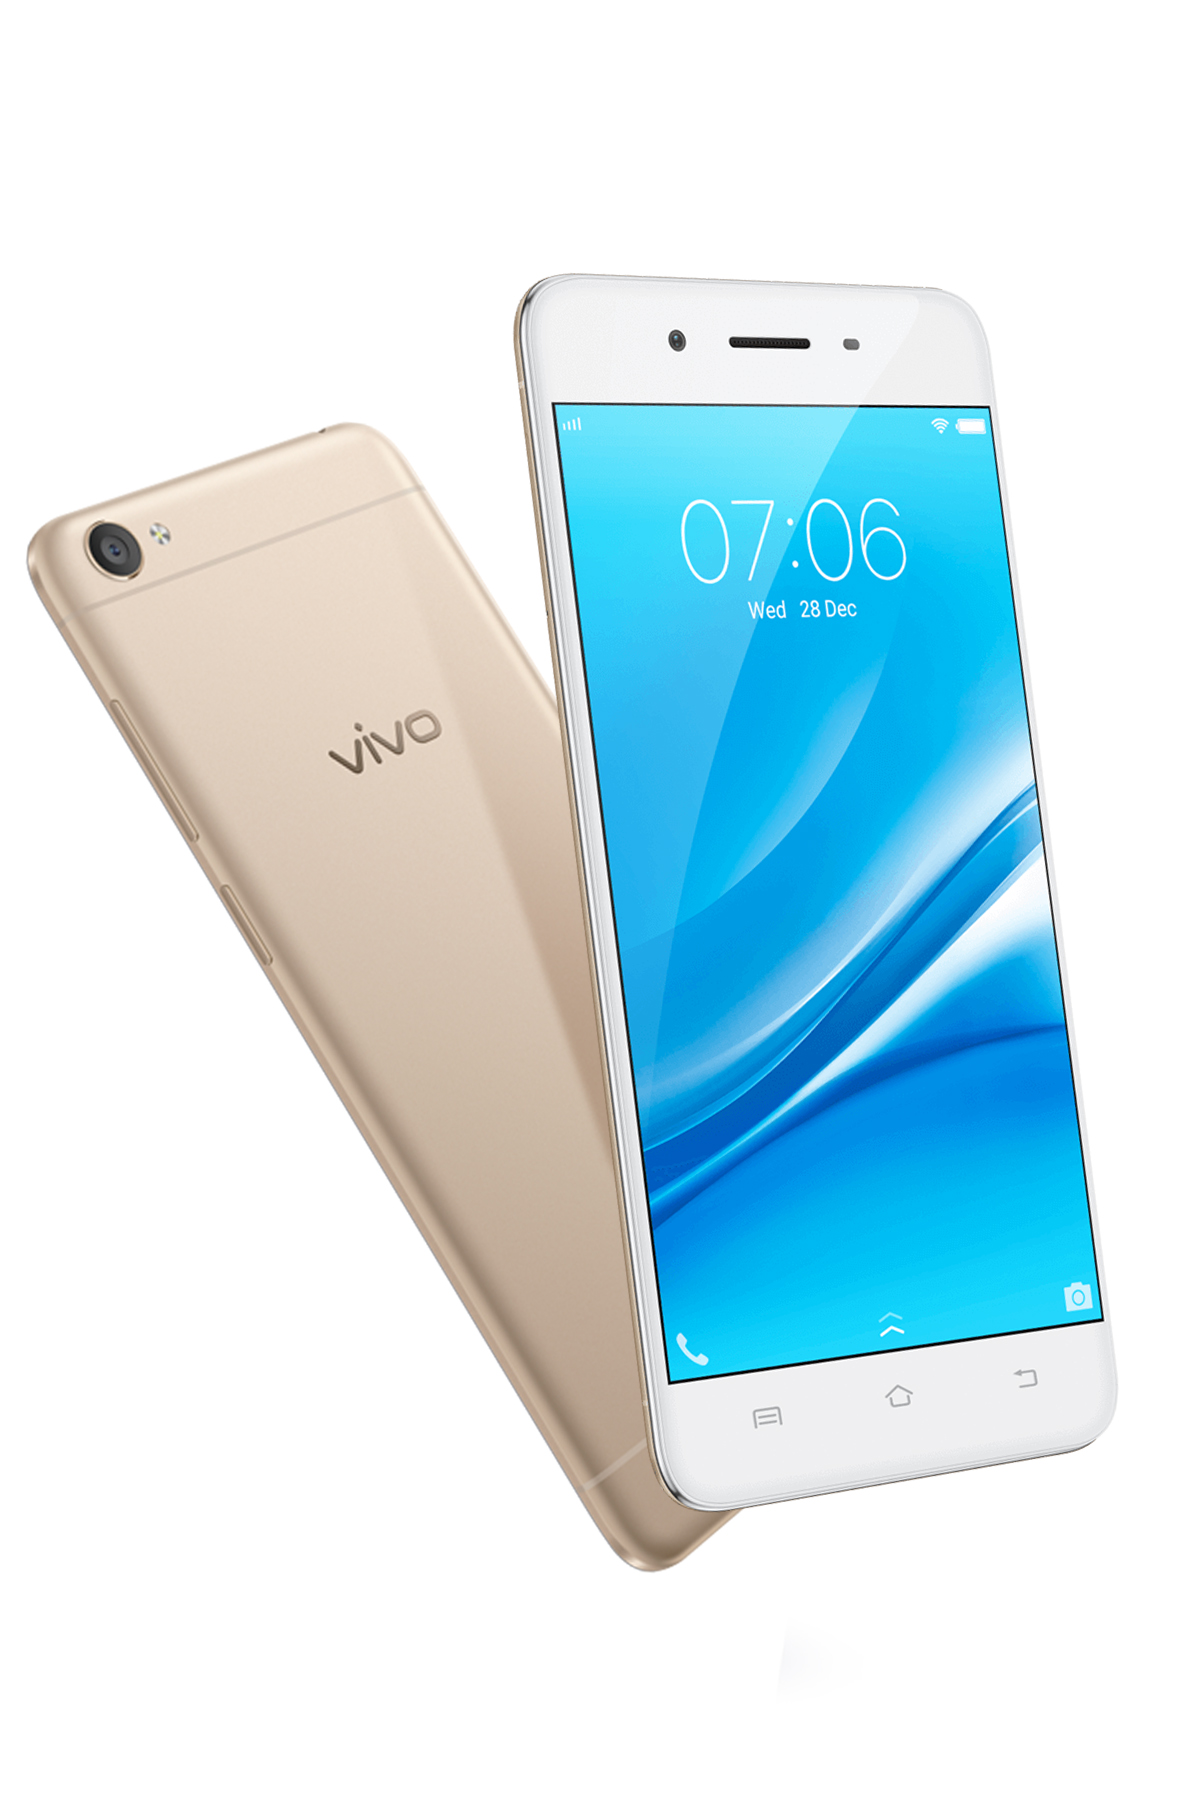 Vivo’s Y55s has a Snapdragon 425 CPU and 3GB of RAM for only PhP8,990